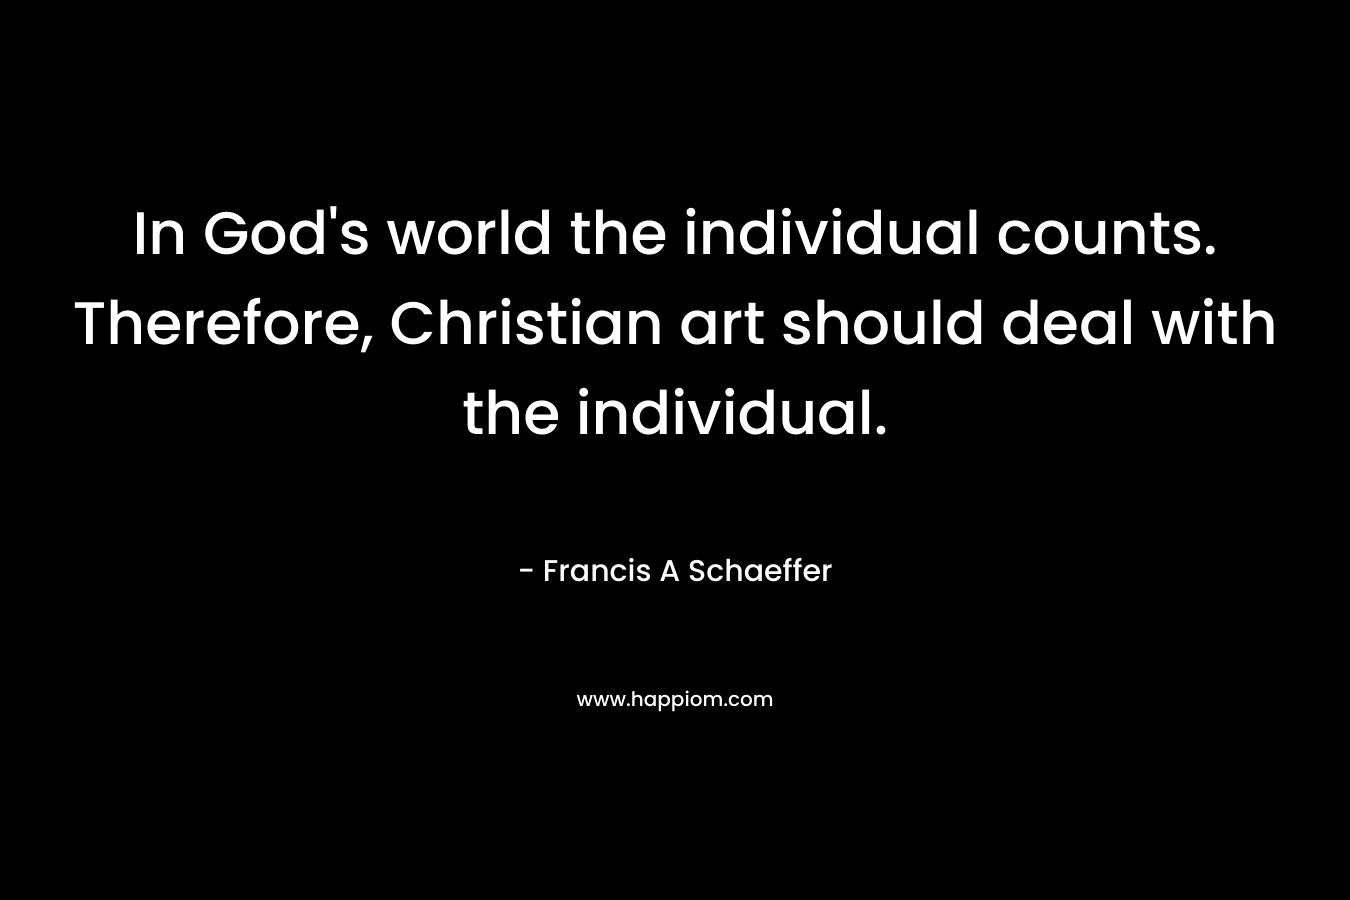 In God’s world the individual counts. Therefore, Christian art should deal with the individual. – Francis A Schaeffer